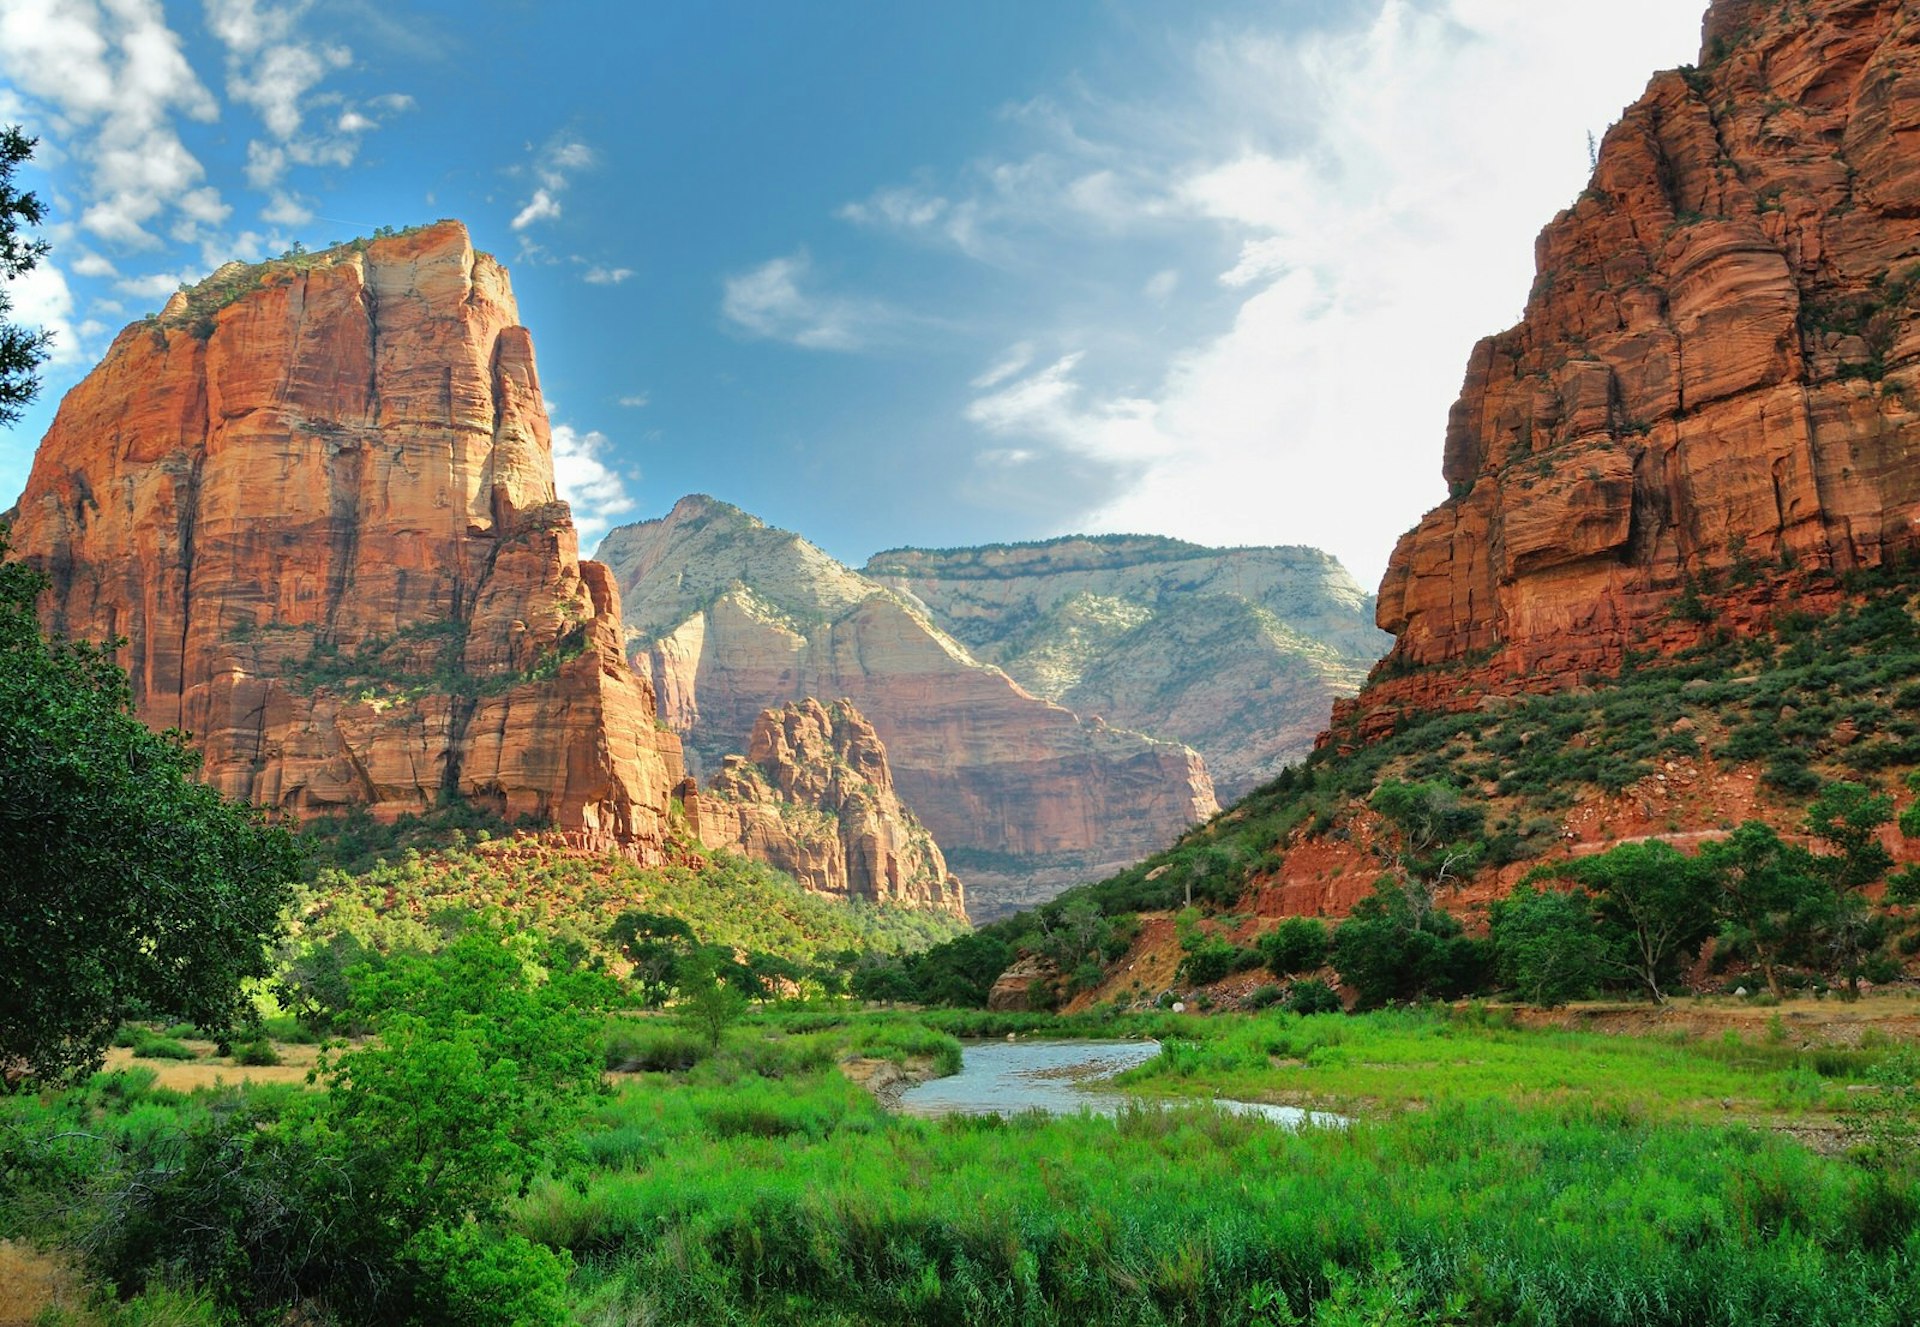 In Utah's Zion National Park, huge ochre cliffs mottled with greenery rise from a verdant valley floor, through which a narrow river bends; more cliffs are visible in the background under a blue sky.